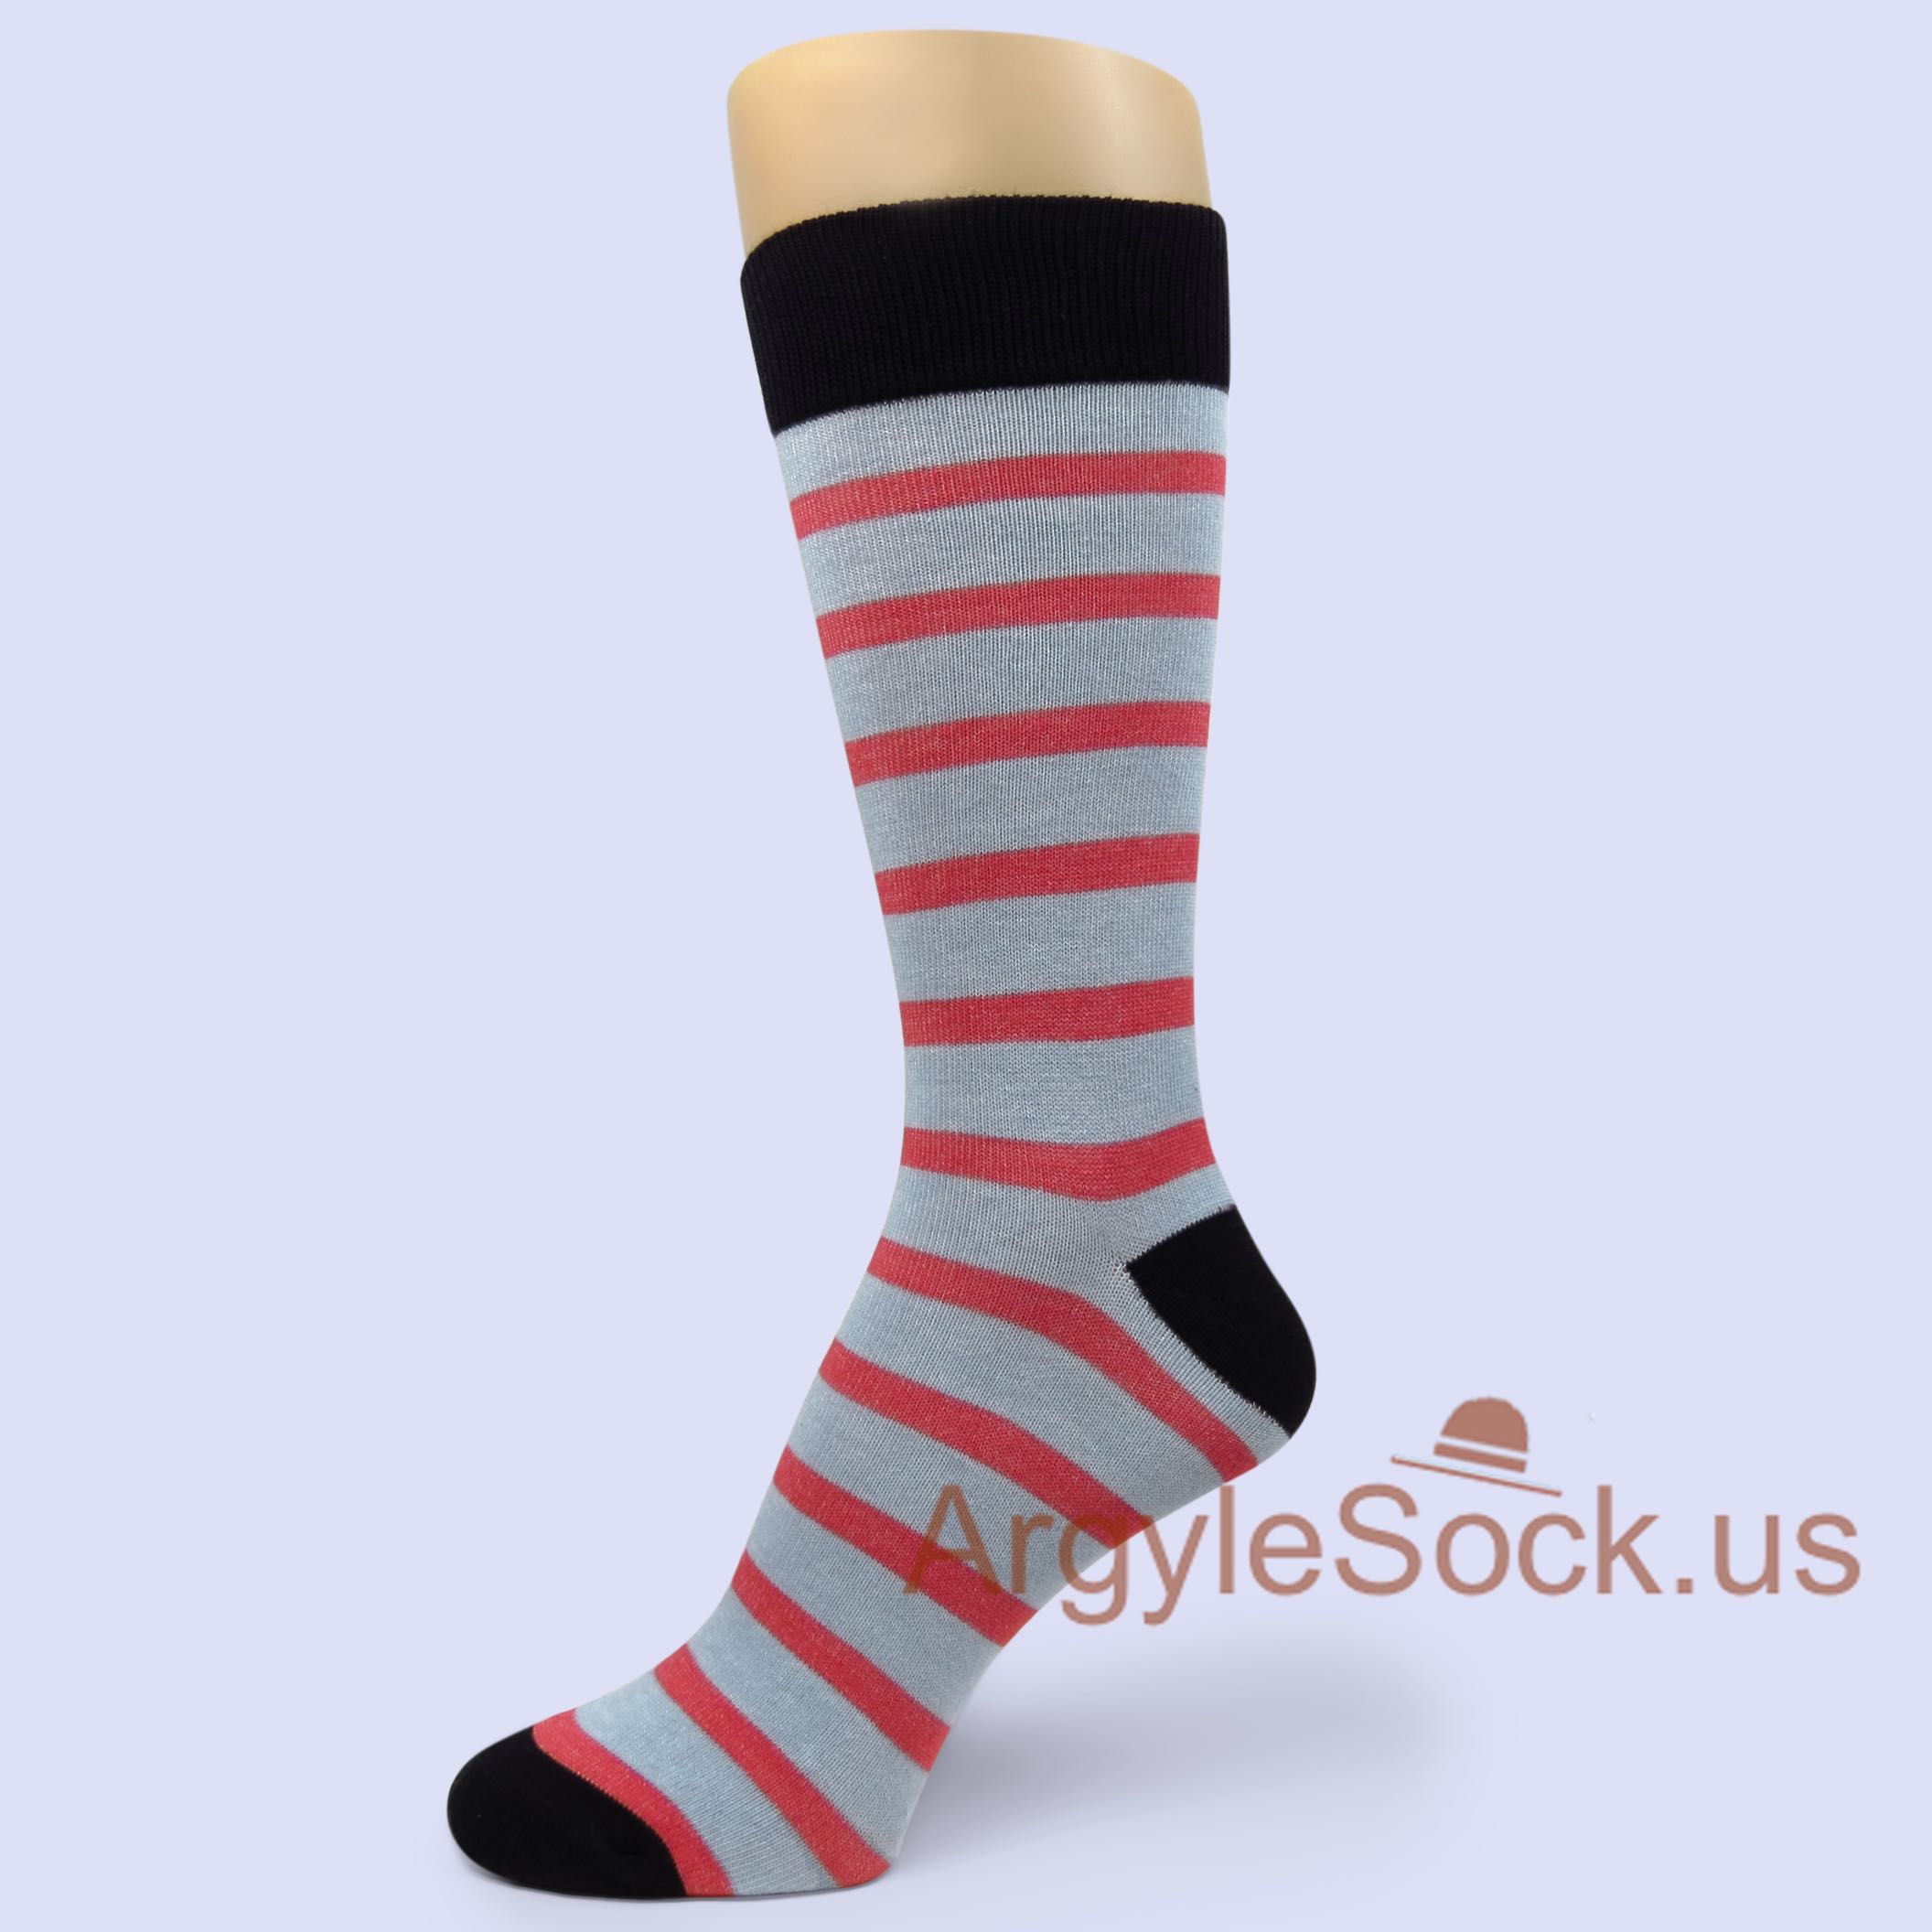 Steel Blue & Chinese Red Striped Mans Socks with Black Toe